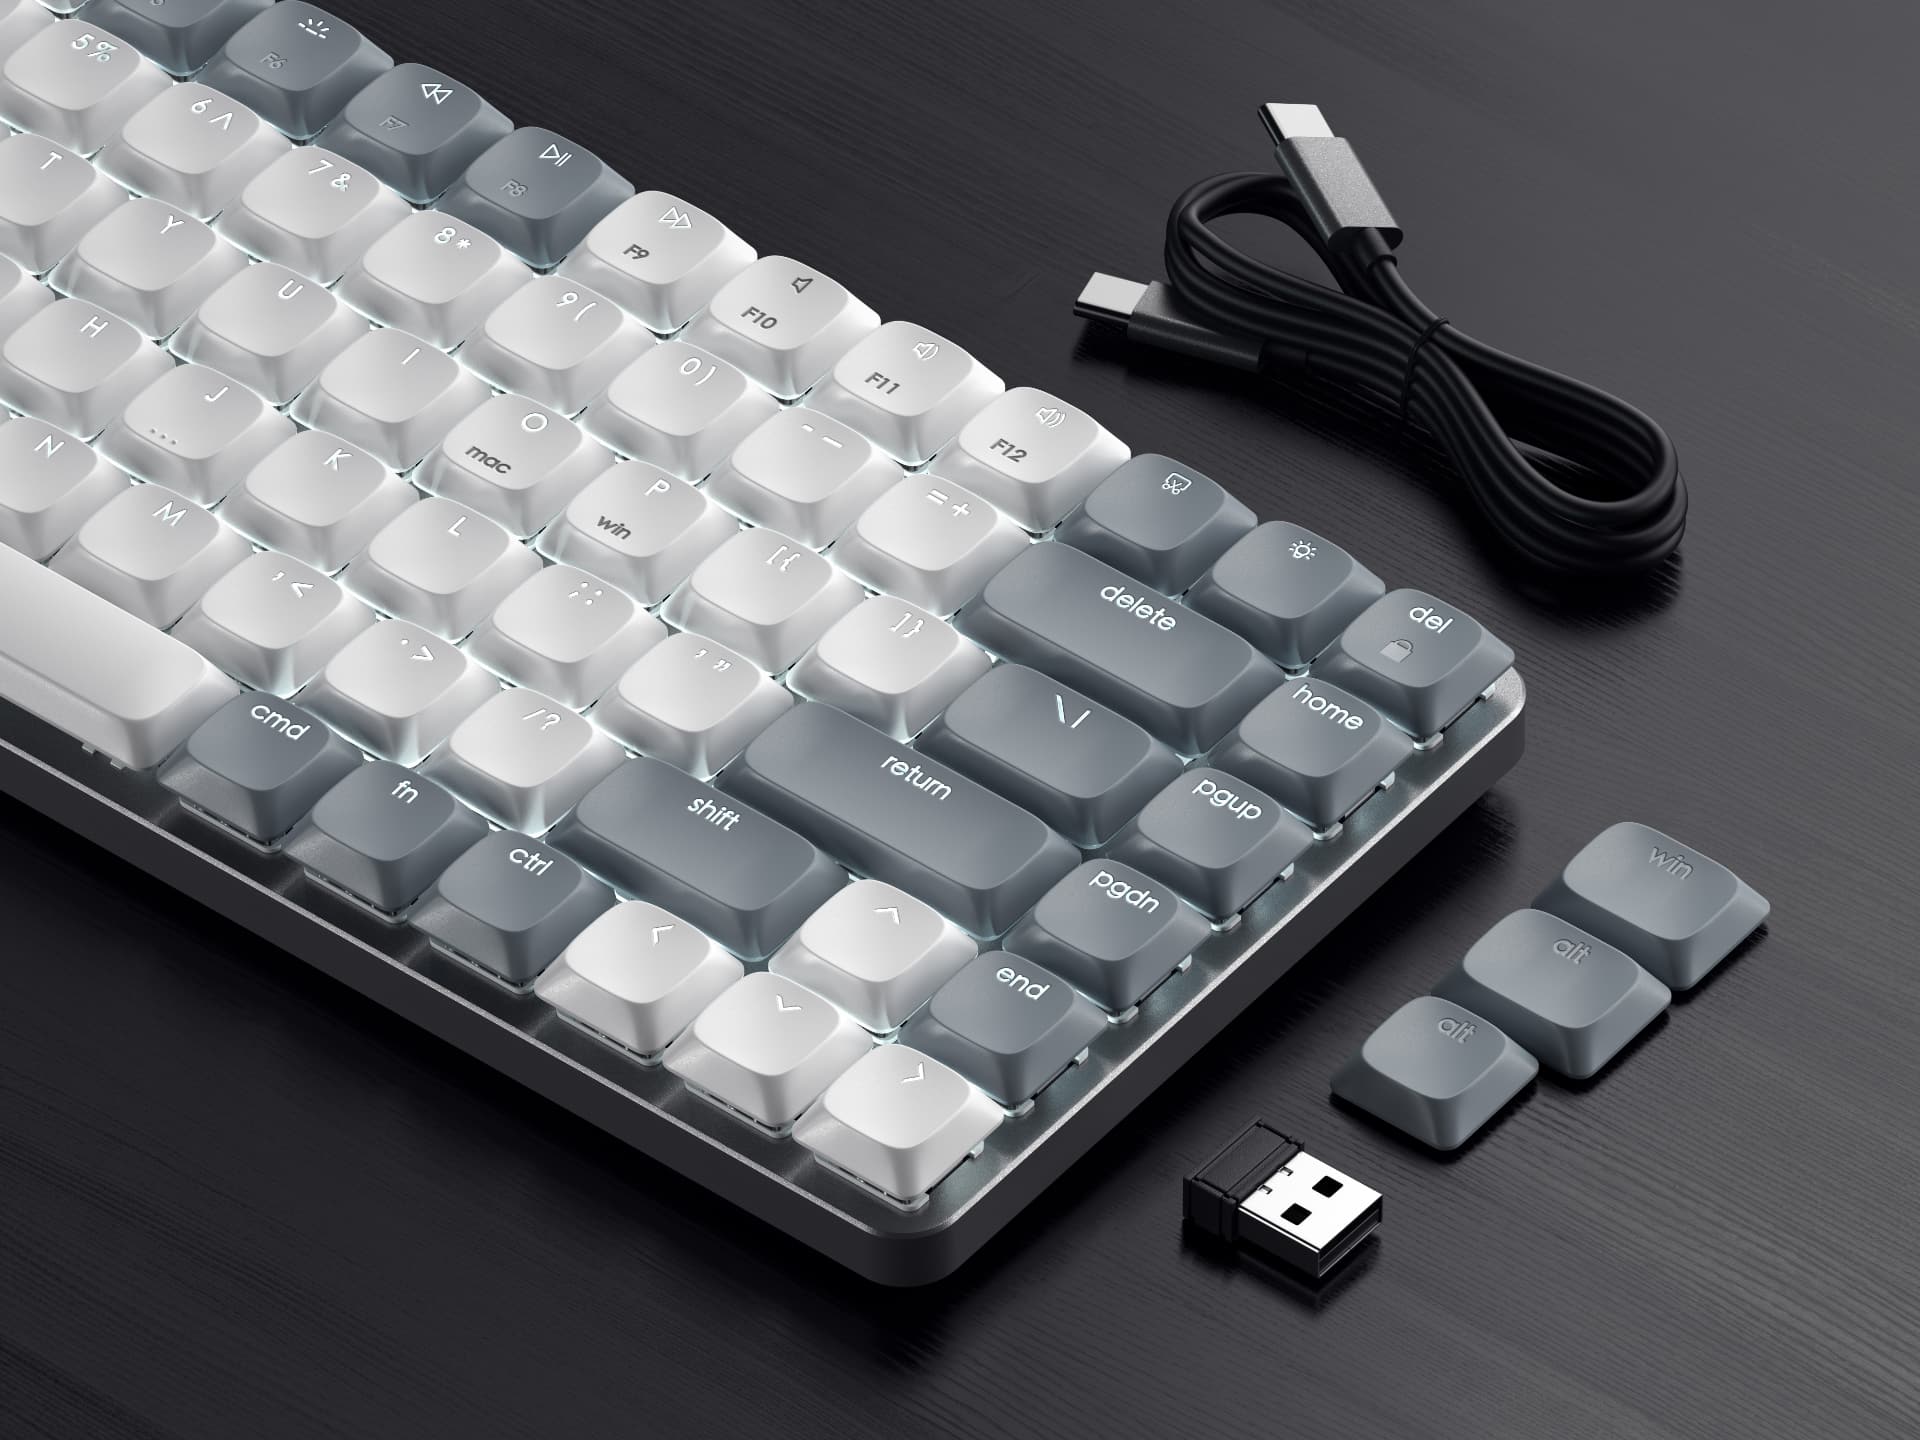 Satechi launches its first mechanical keyboard for Mac and Windows